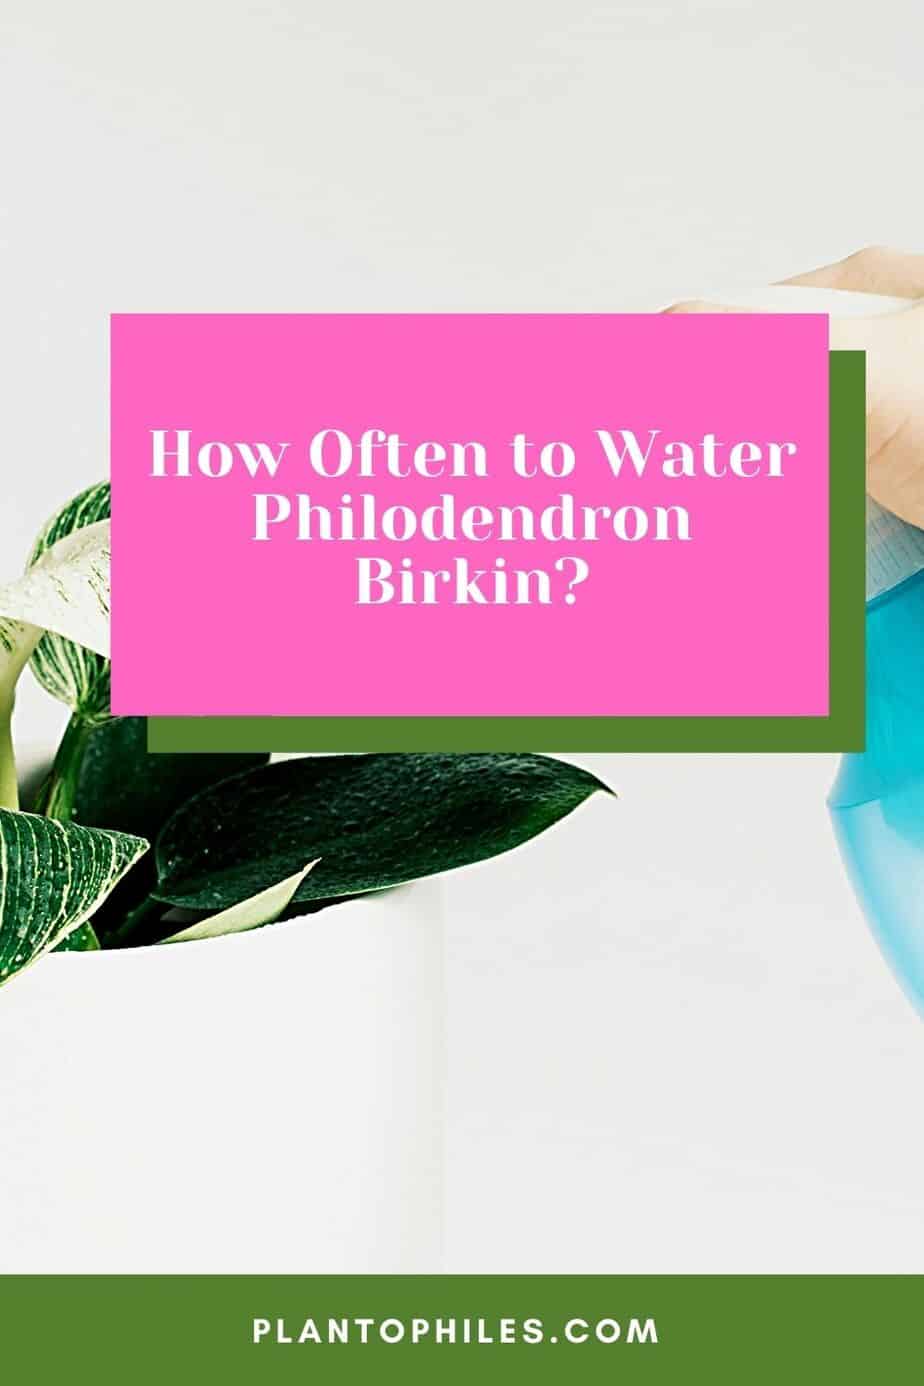 How Often to Water Philodendron Birkin